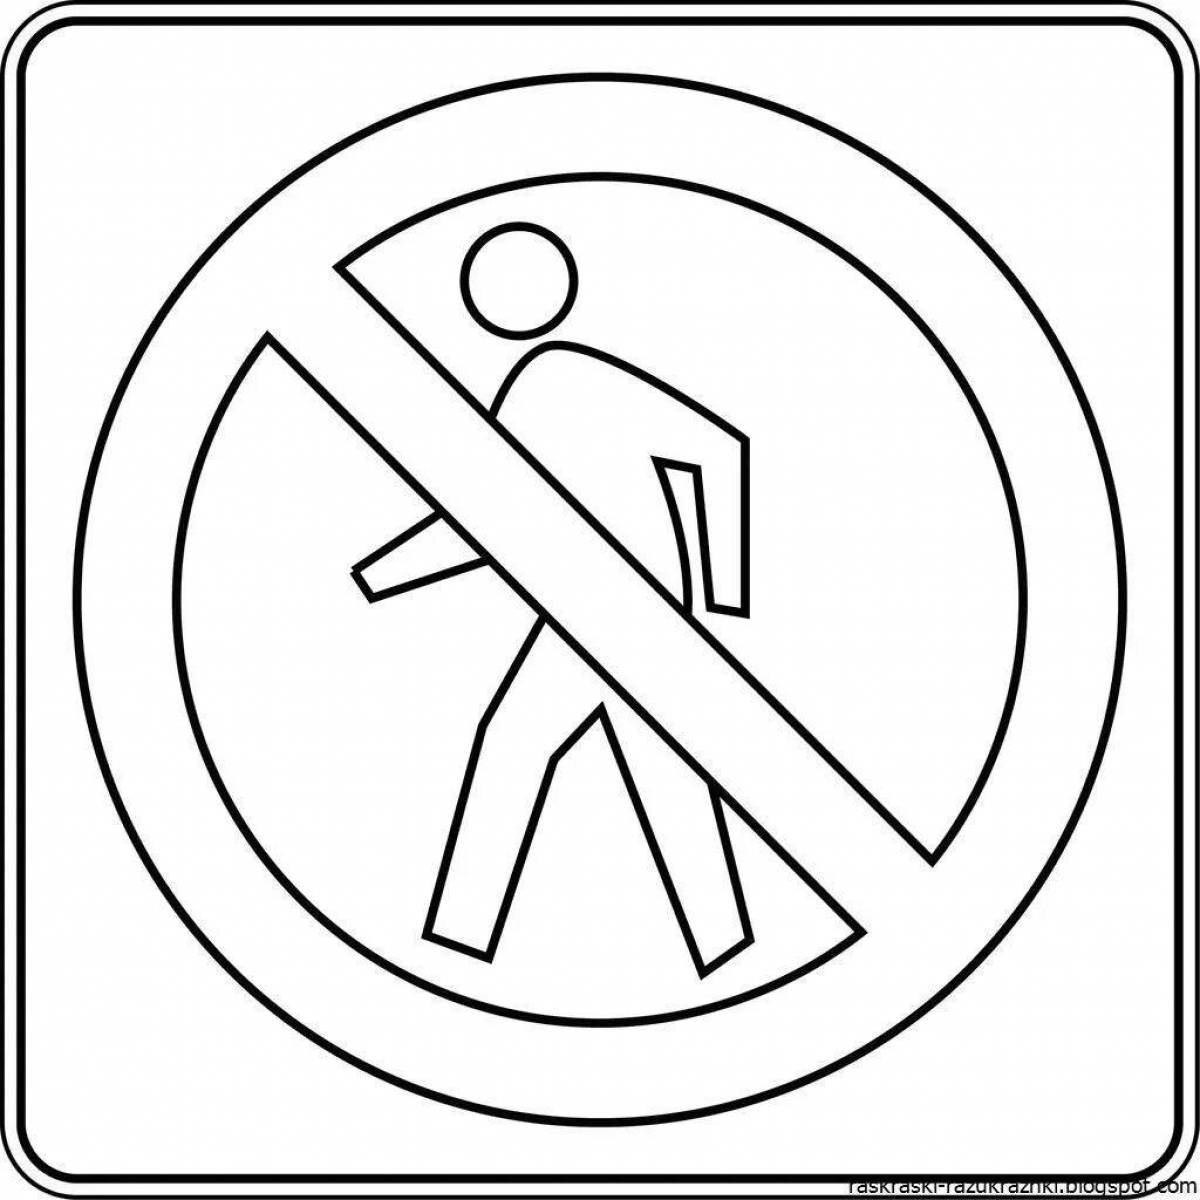 Bold No Pedestrian Traffic Sign Coloring Page